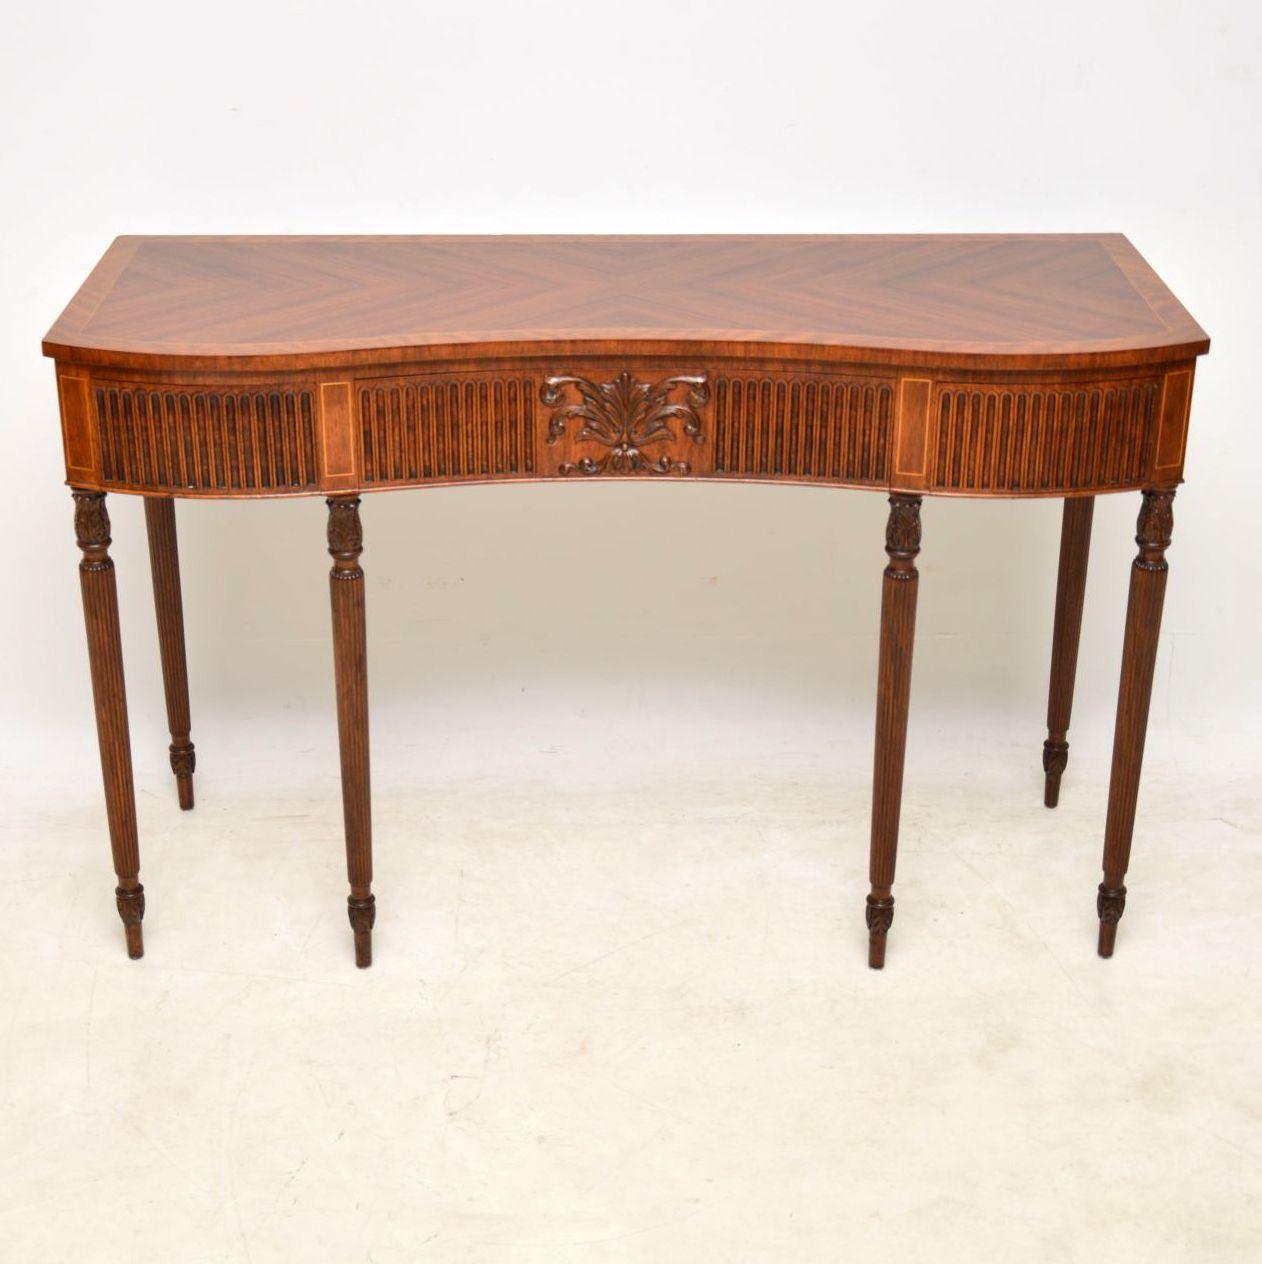 Very long antique mahogany and kingwood console or server table, with an inverted serpentine shaped front. It's in excellent condition having just been polished and I would date it to around the 1930s period. This table is a very impressive piece of